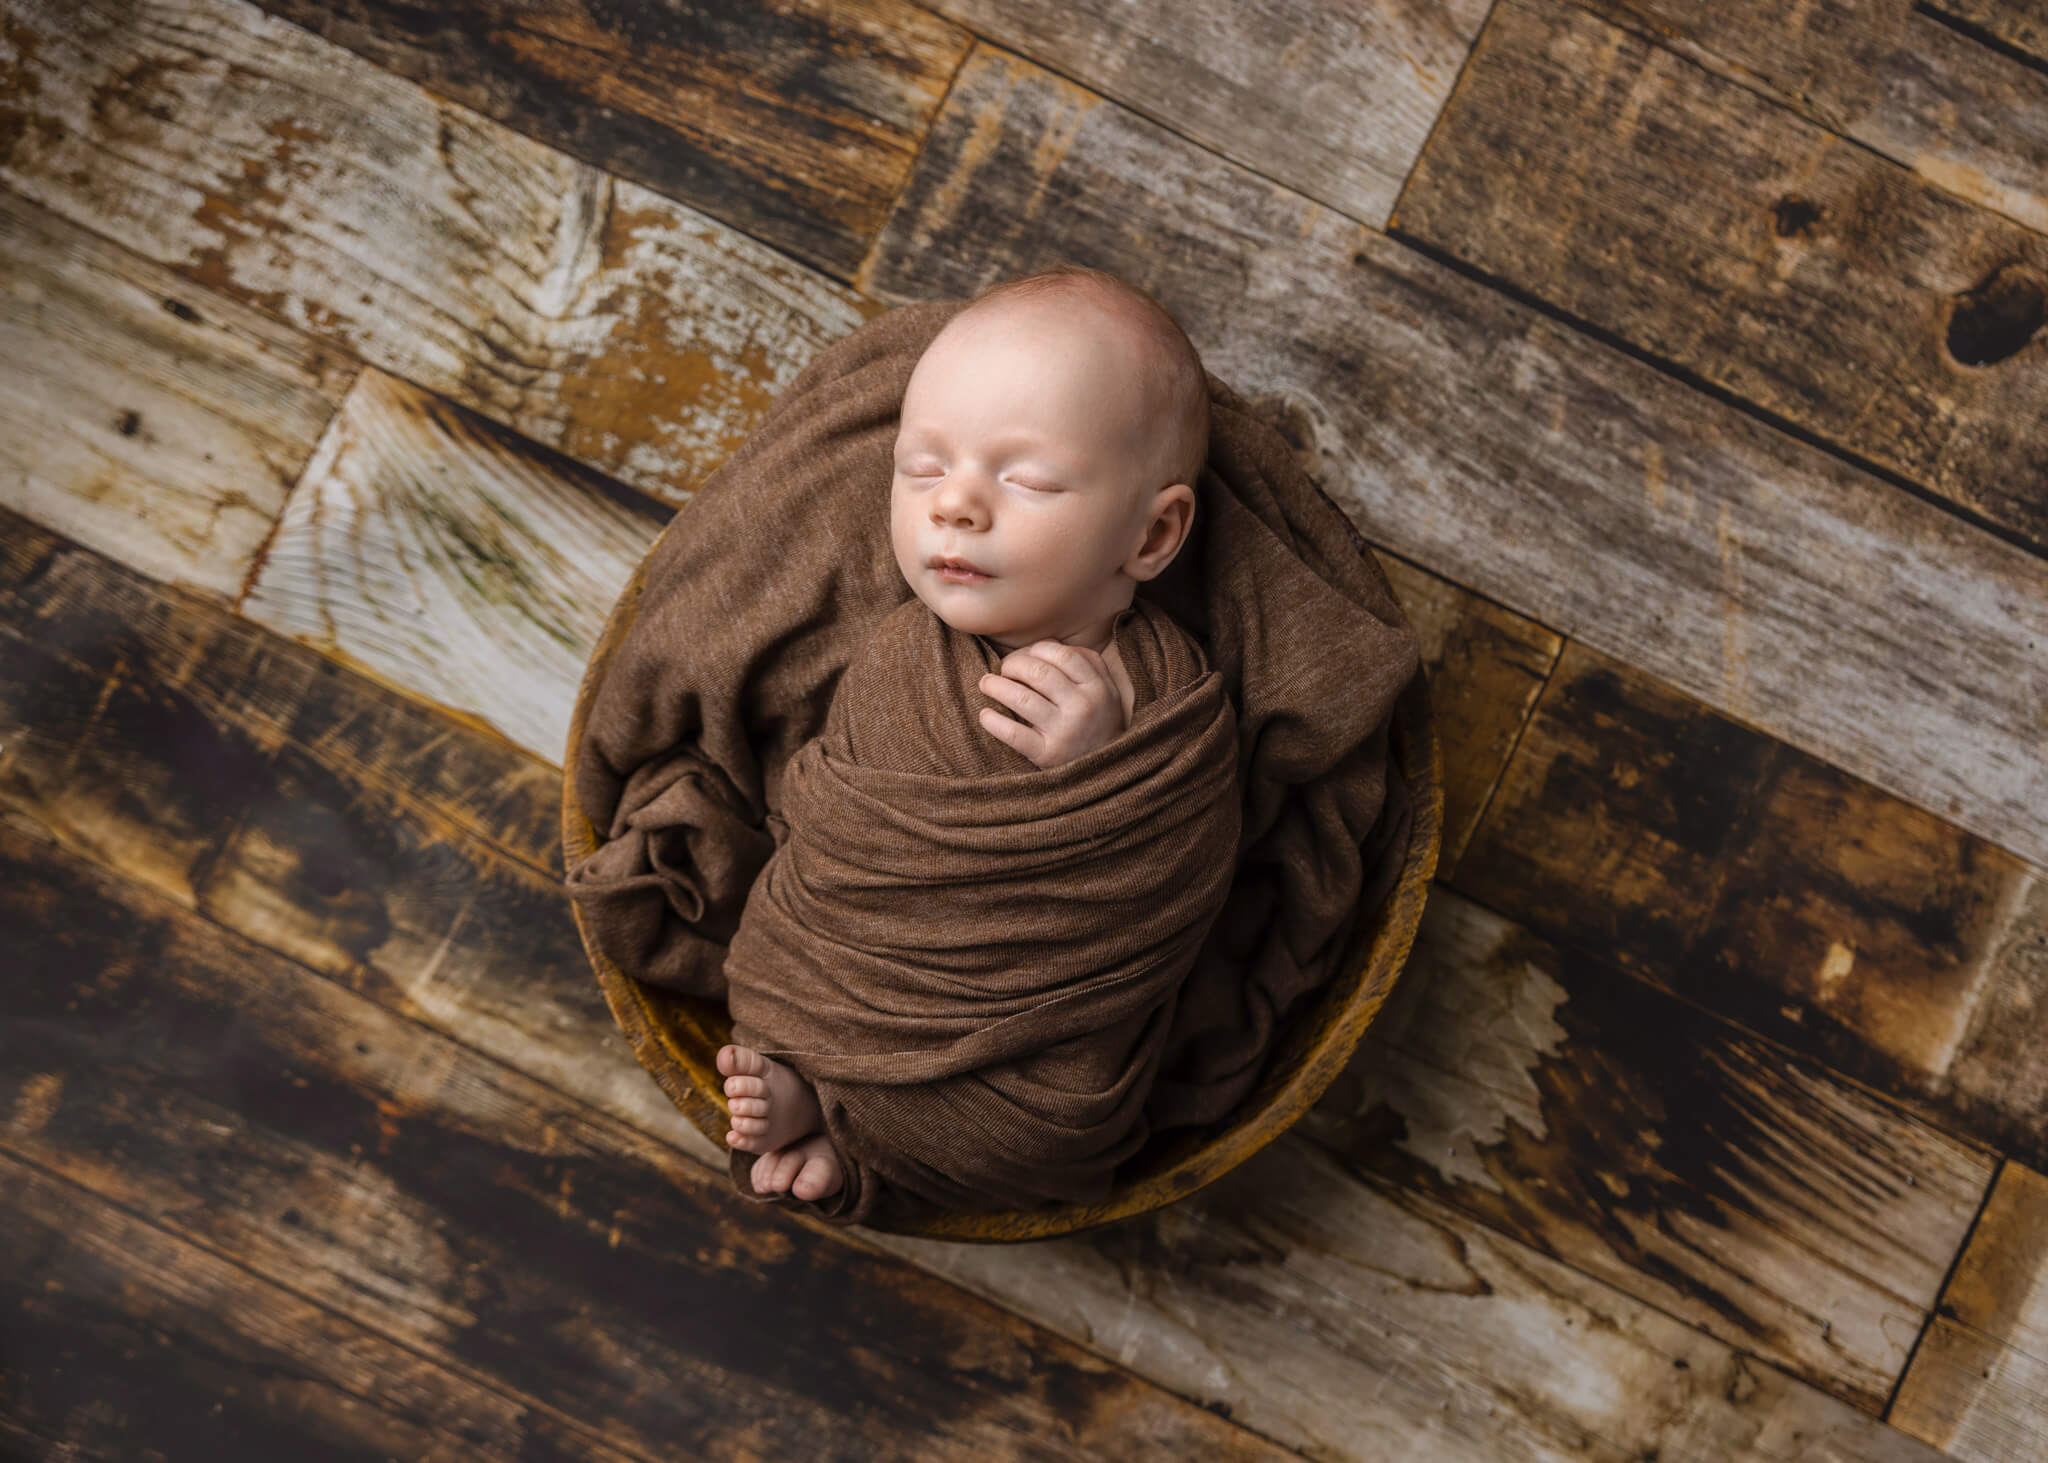 newborn baby in a brown wrap asleep in a small wooden bowl on a wooden floor backdrop